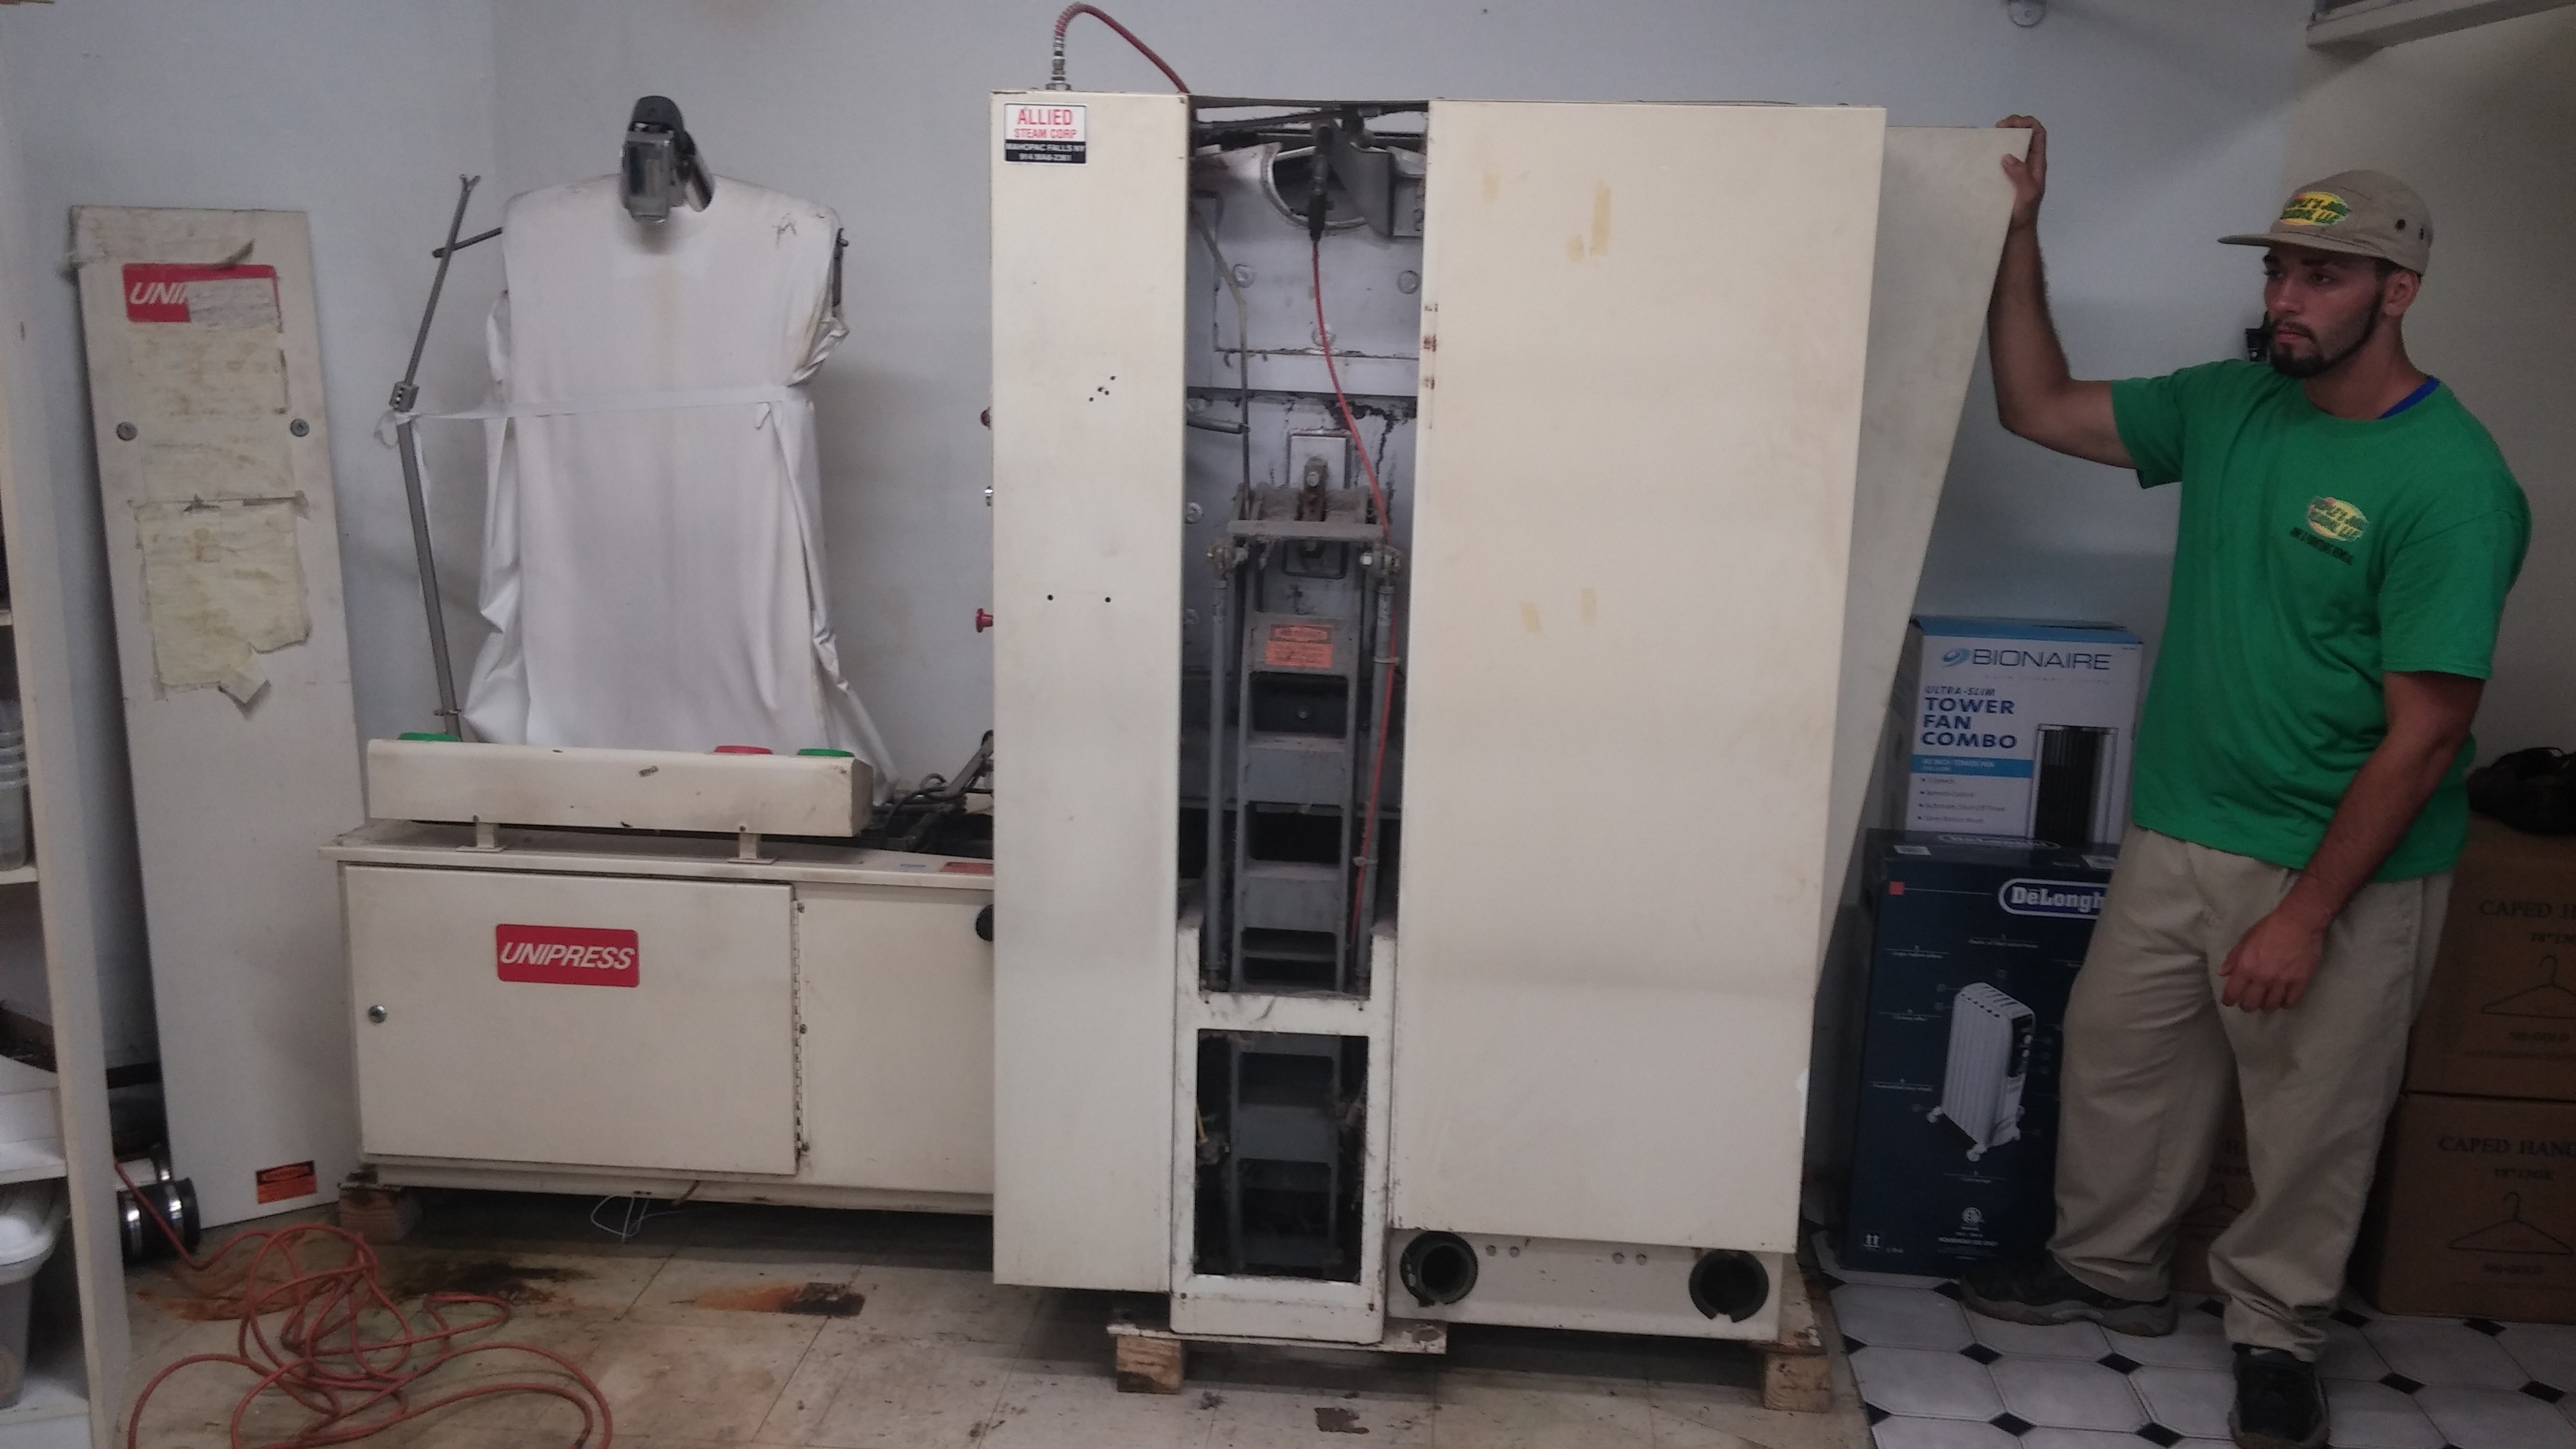 We are about to Disassemble & haul away a UNIPRESS SHIRT & SLEEVES PRESS MACHINE mfg 1980 from a Dry Cleaner.